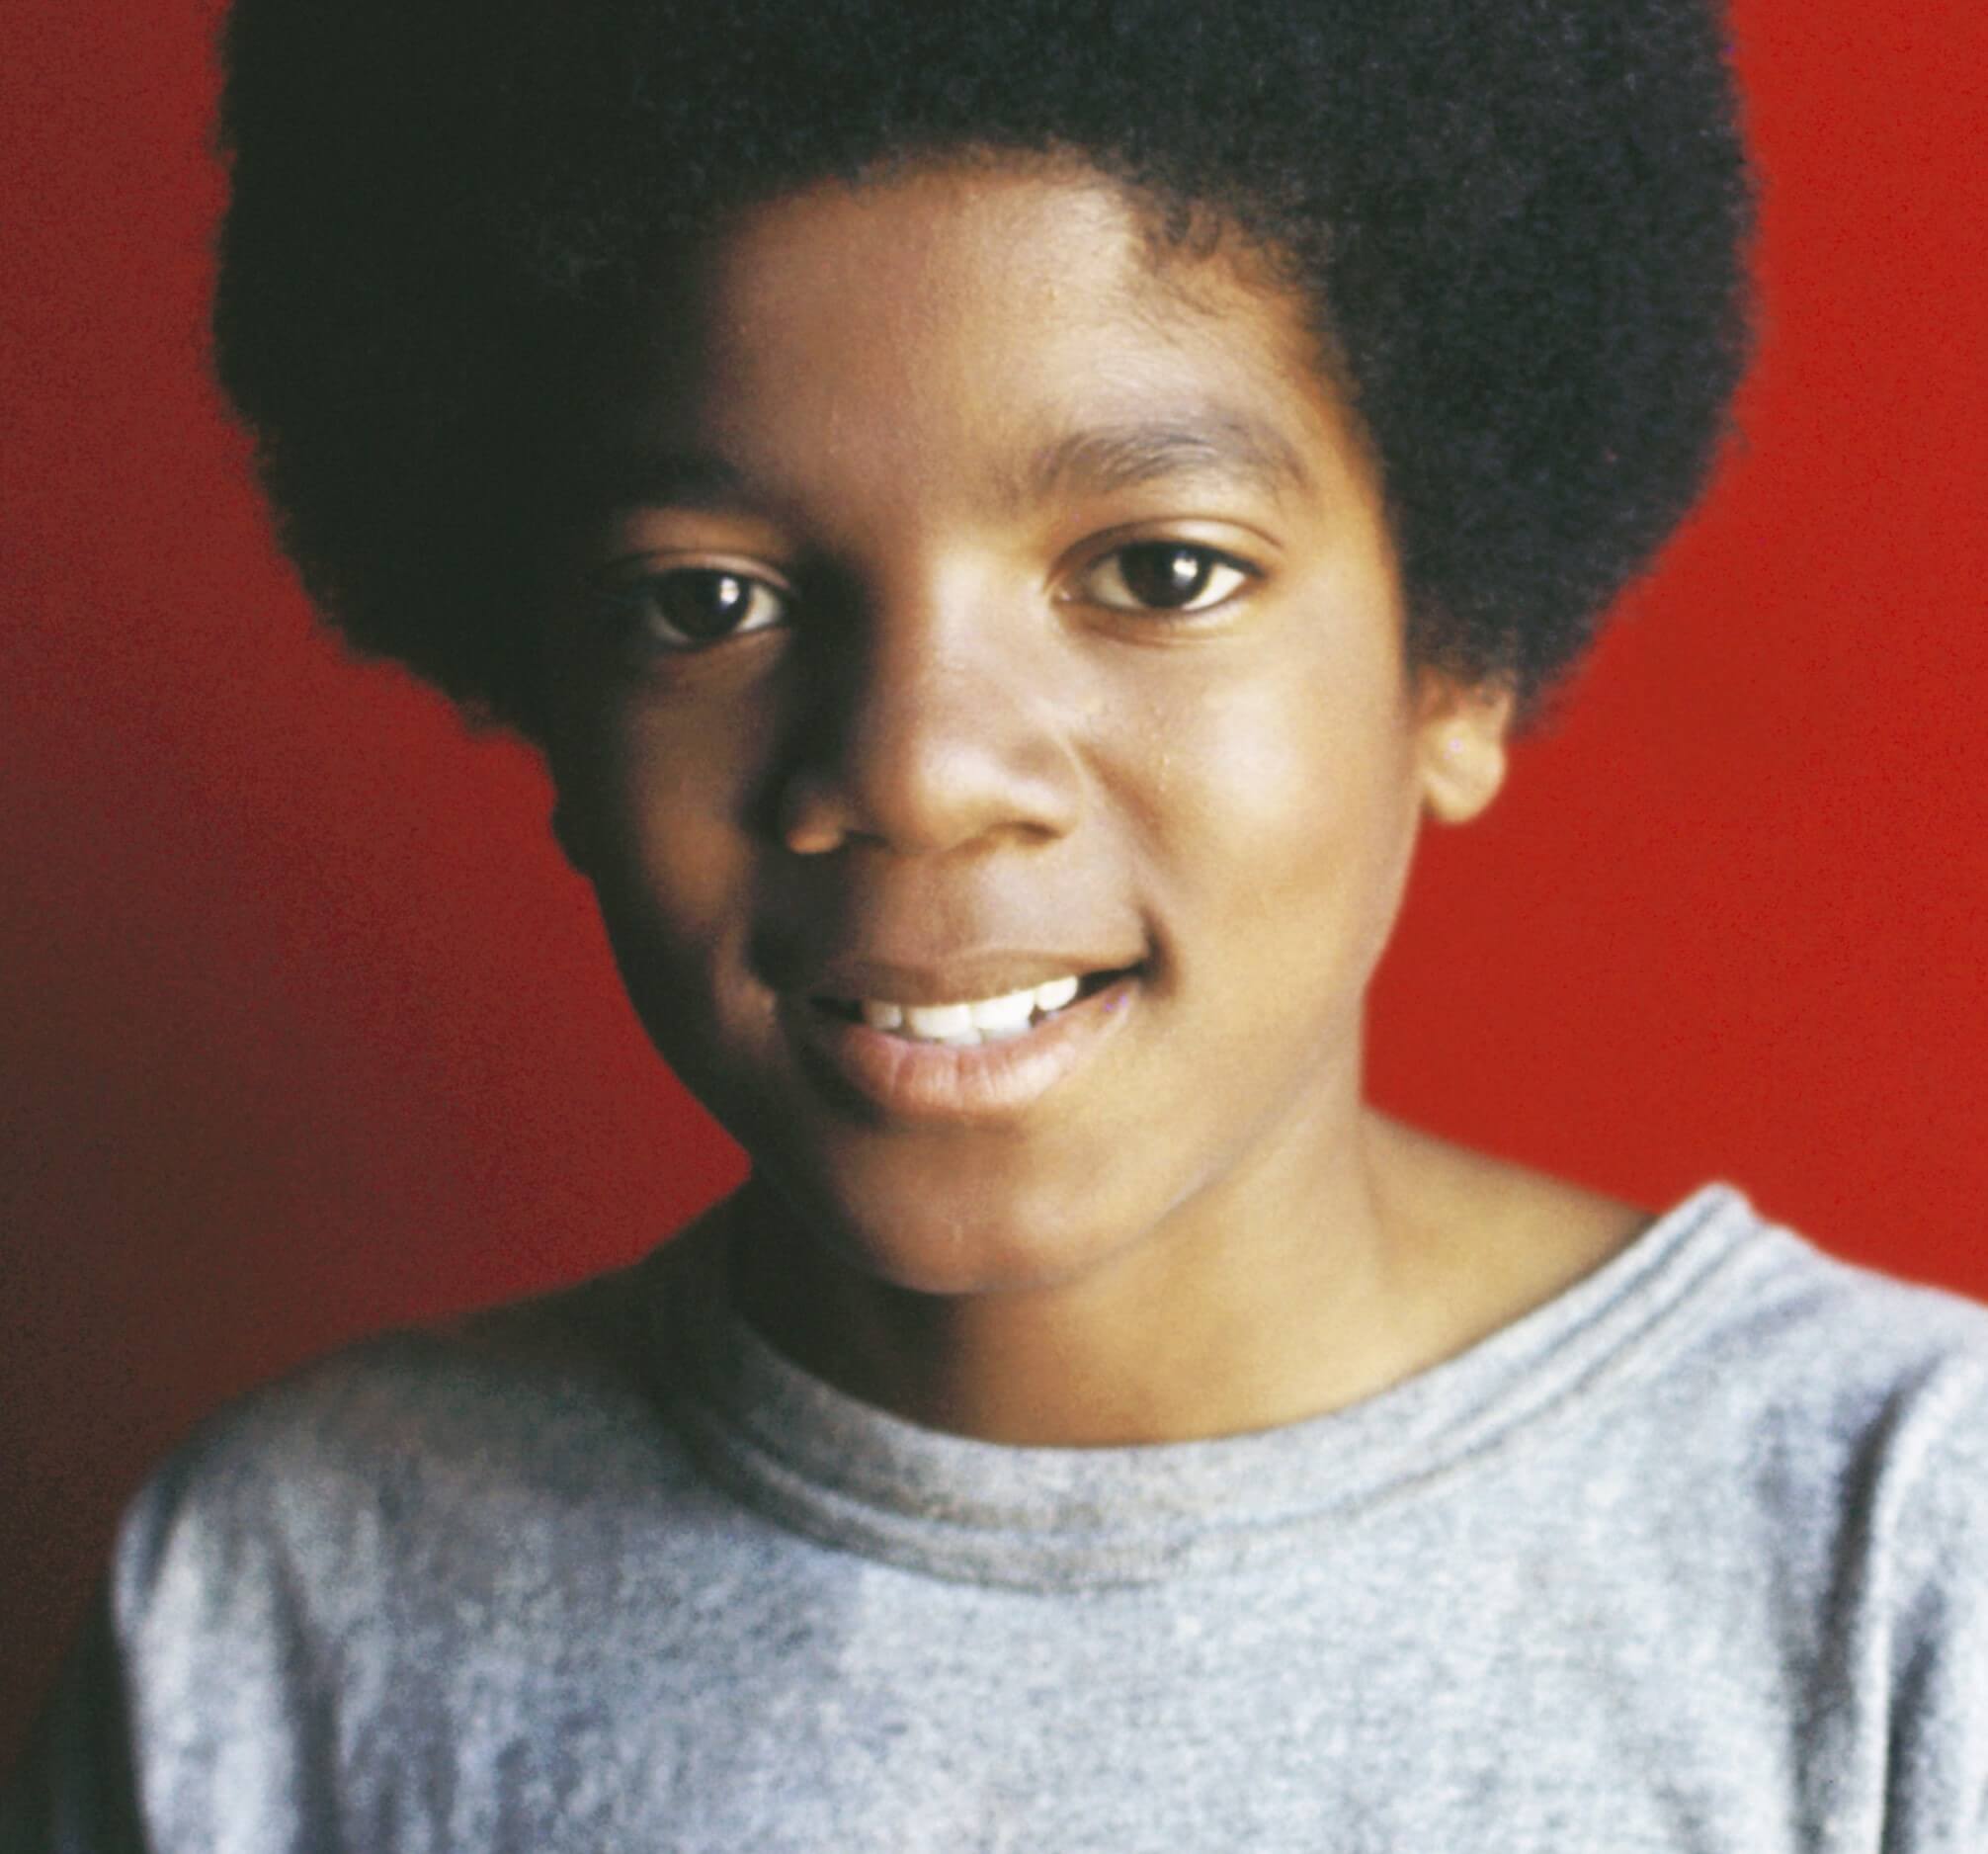 Michael Jackson of The Jackson 5 with a red background